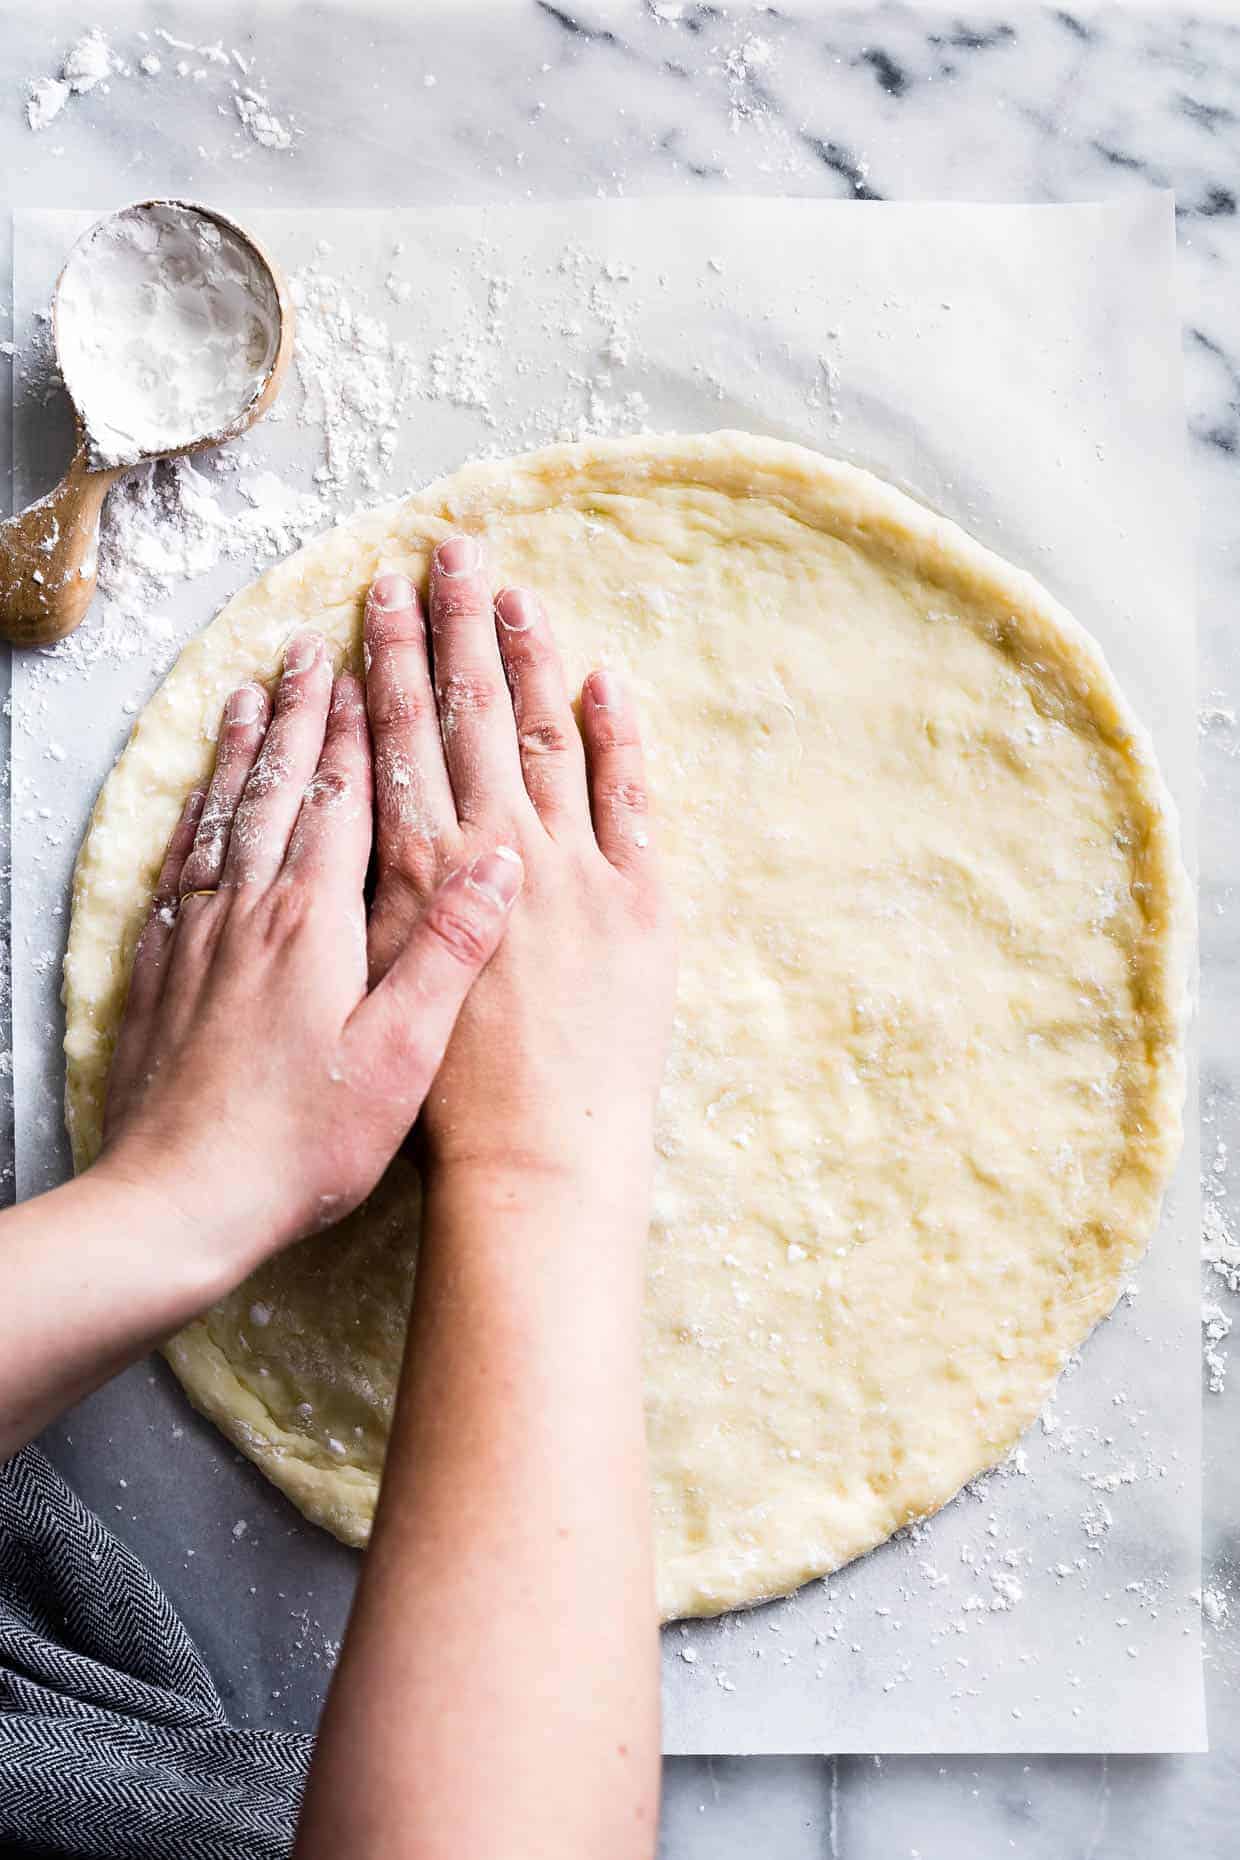 How to Make Gluten-Free Pizza Dough